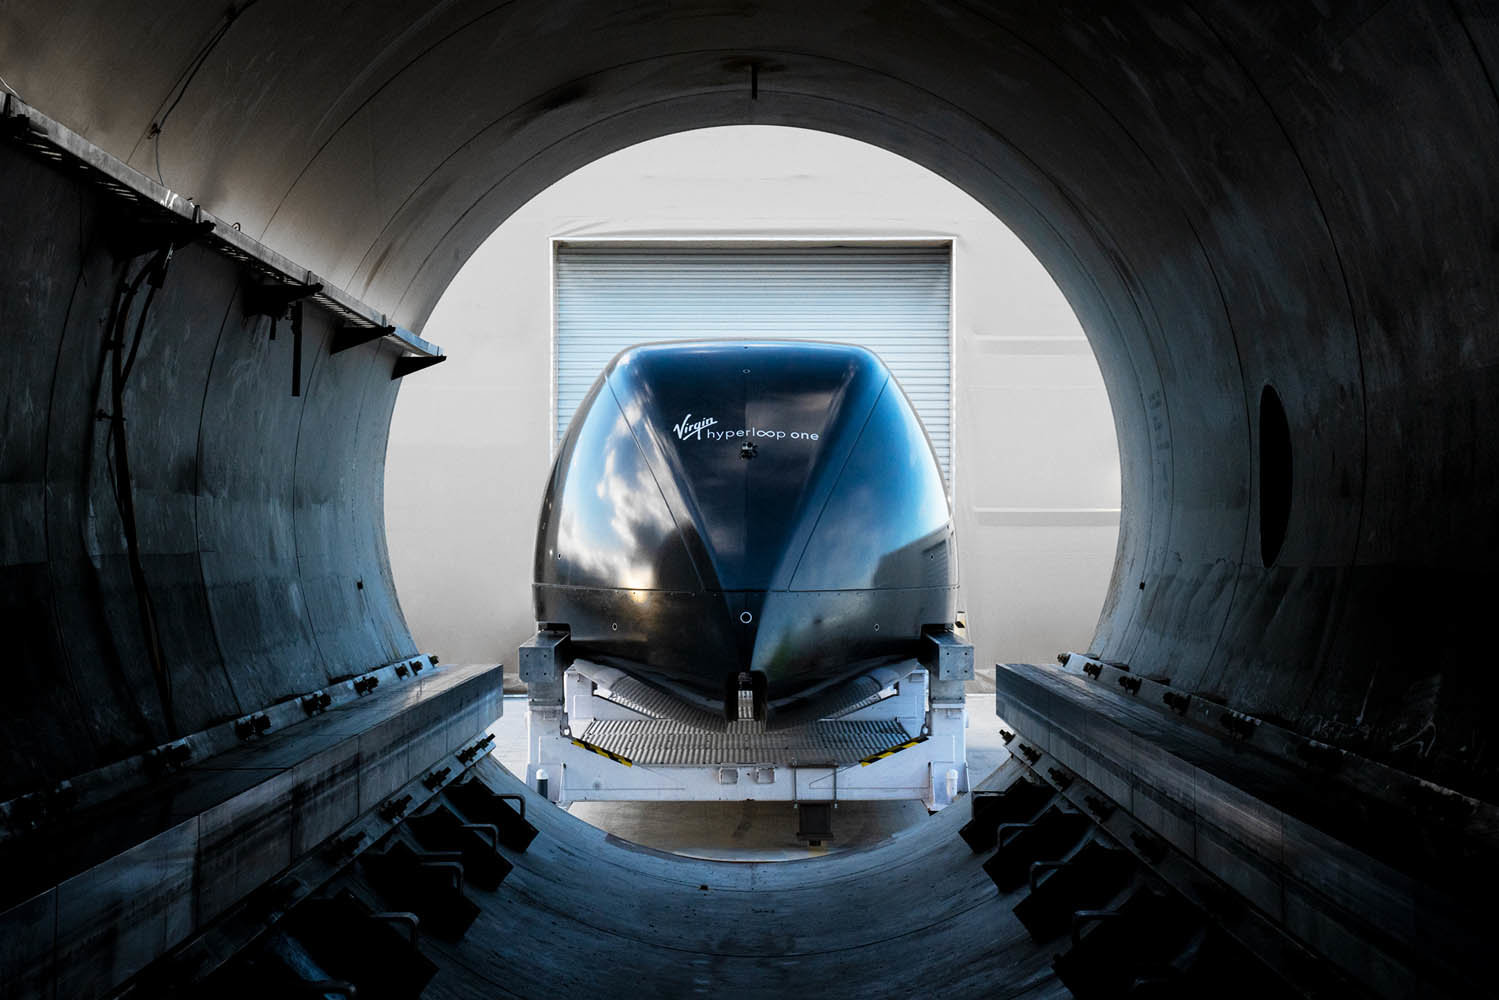 EYE ON THE FUTURE: Los Angeles-based Virgin Hyperloop One wants to make high-speed travel a reality with a steel, vacuum tube that transports passenger pods at nearly 700 mph.